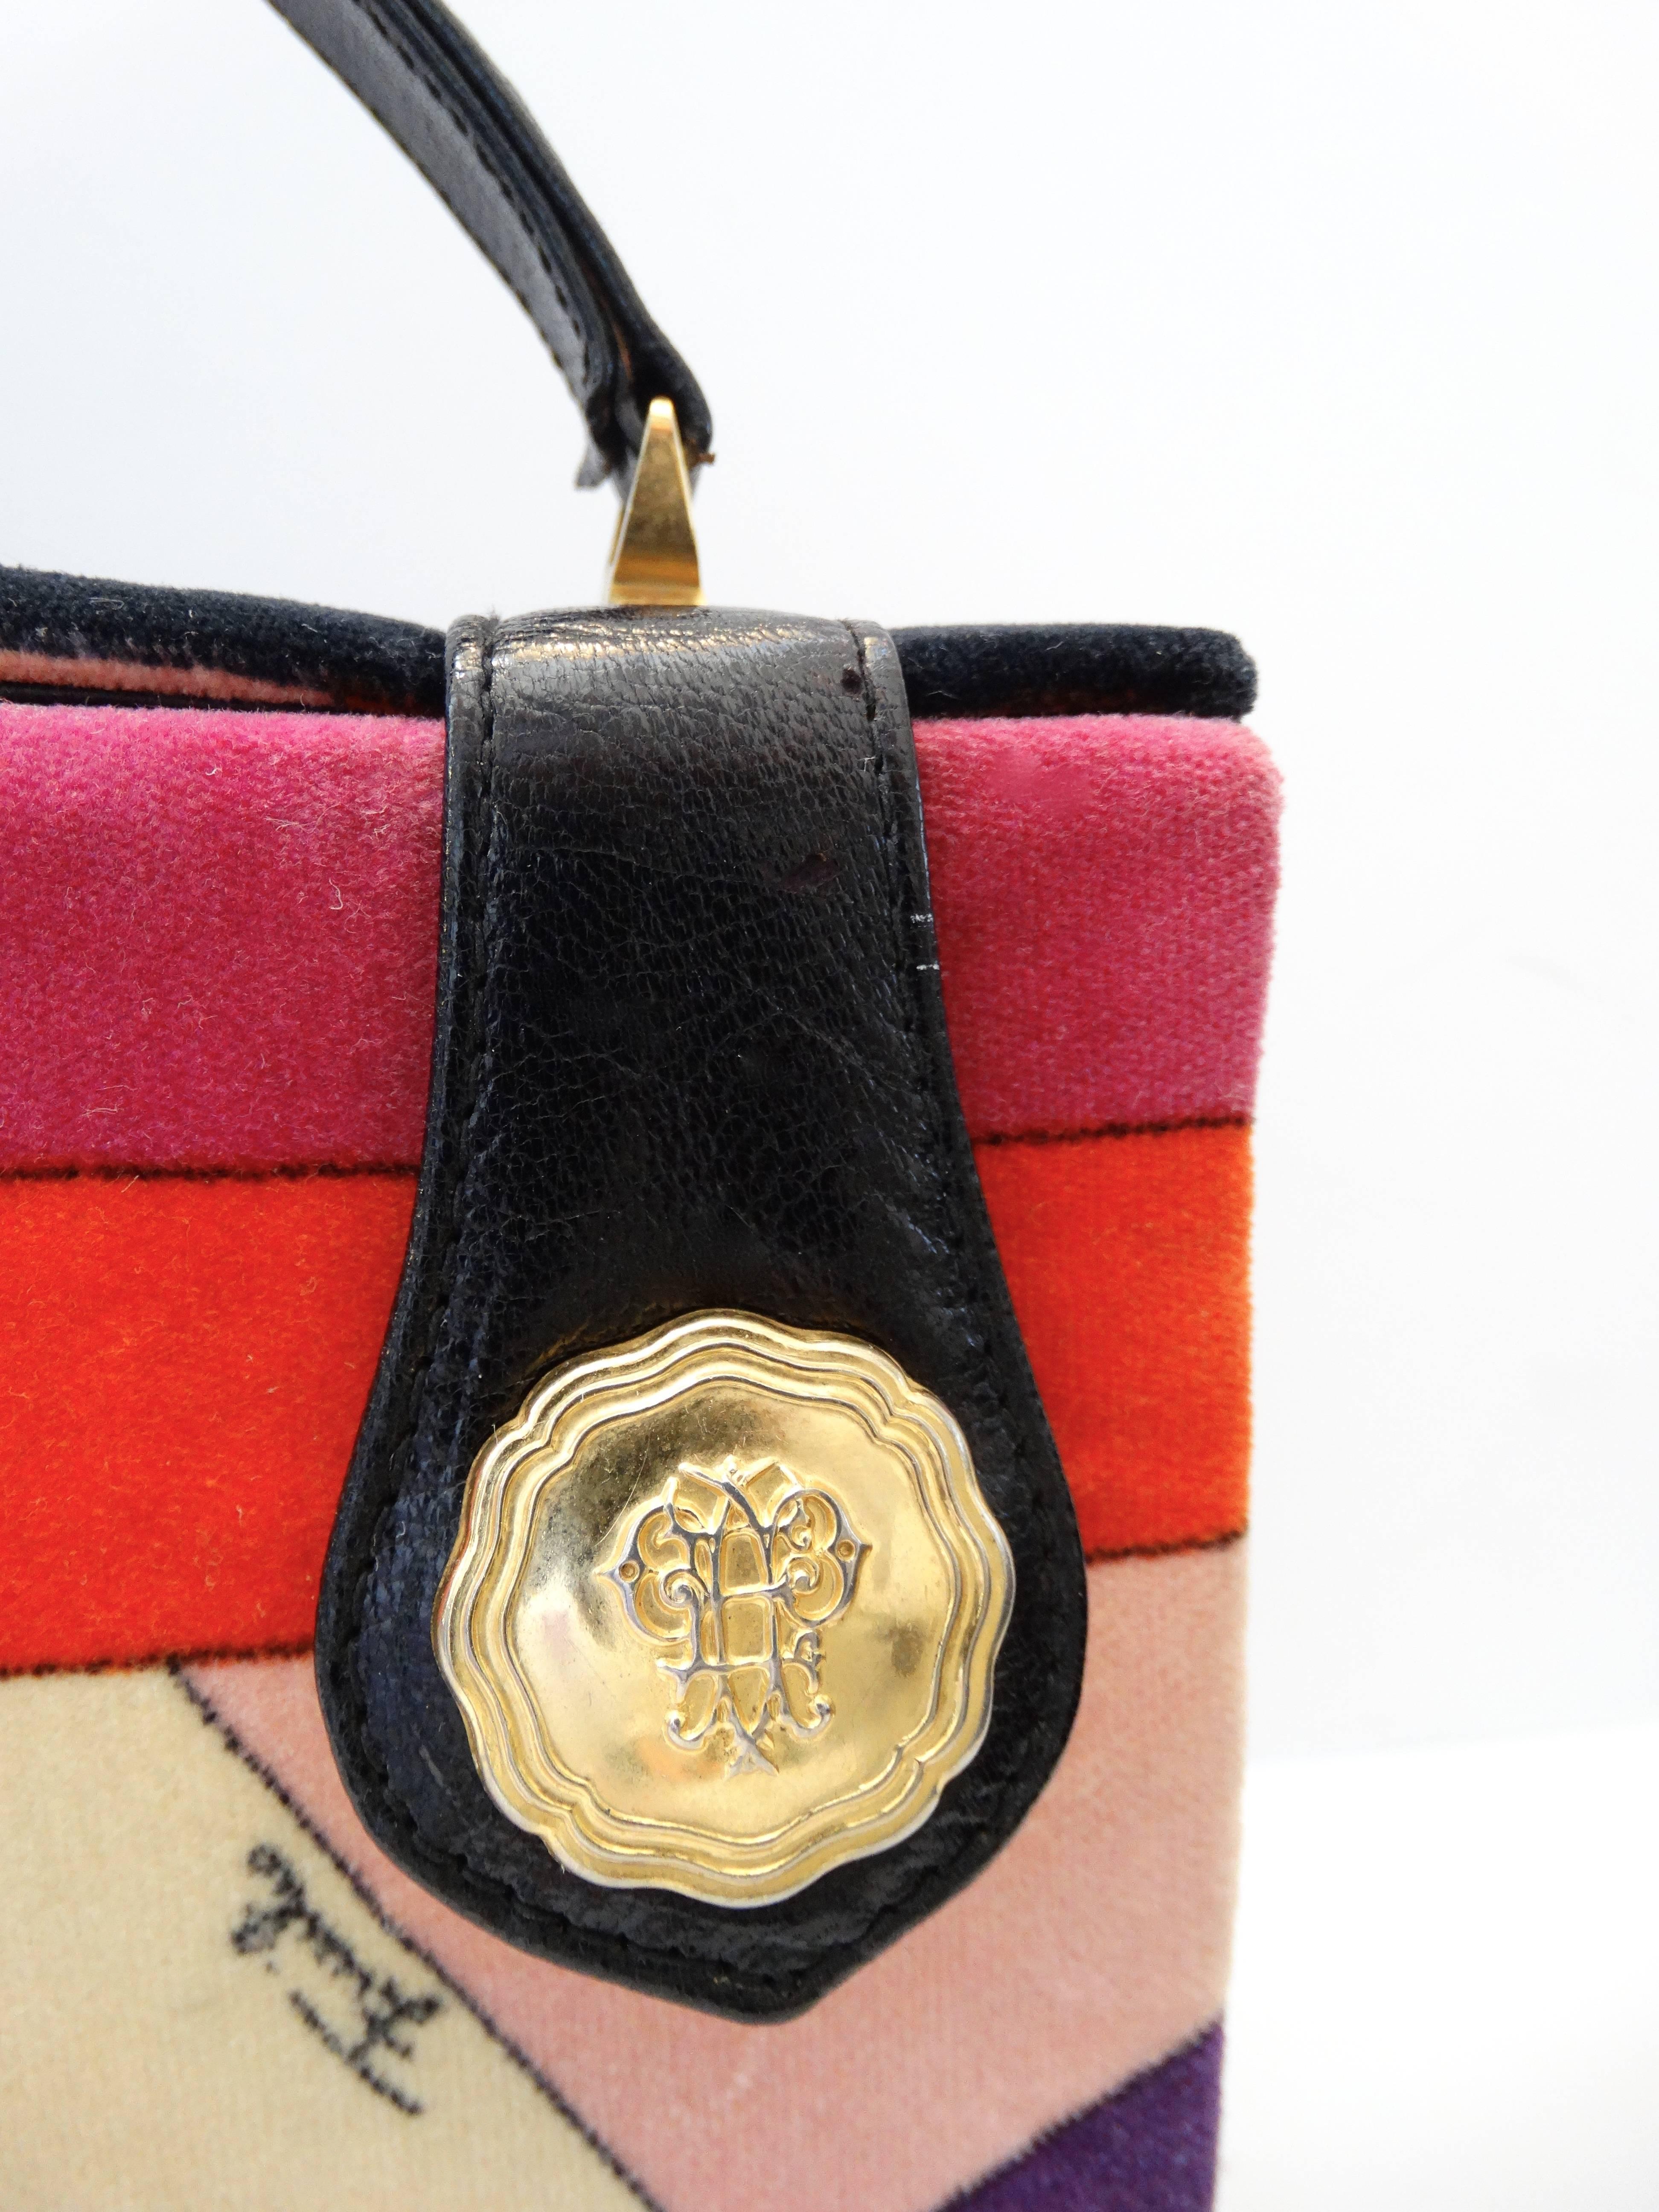 Amazing 1970s box bag from iconic designer Emilio Pucci! Made of Pucci's signature cotton velvet fabric- printed with a geometric pattern in shades of red, pink and cream. Top flap is secured with two snaps, topped with two gold metal Pucci emblems.